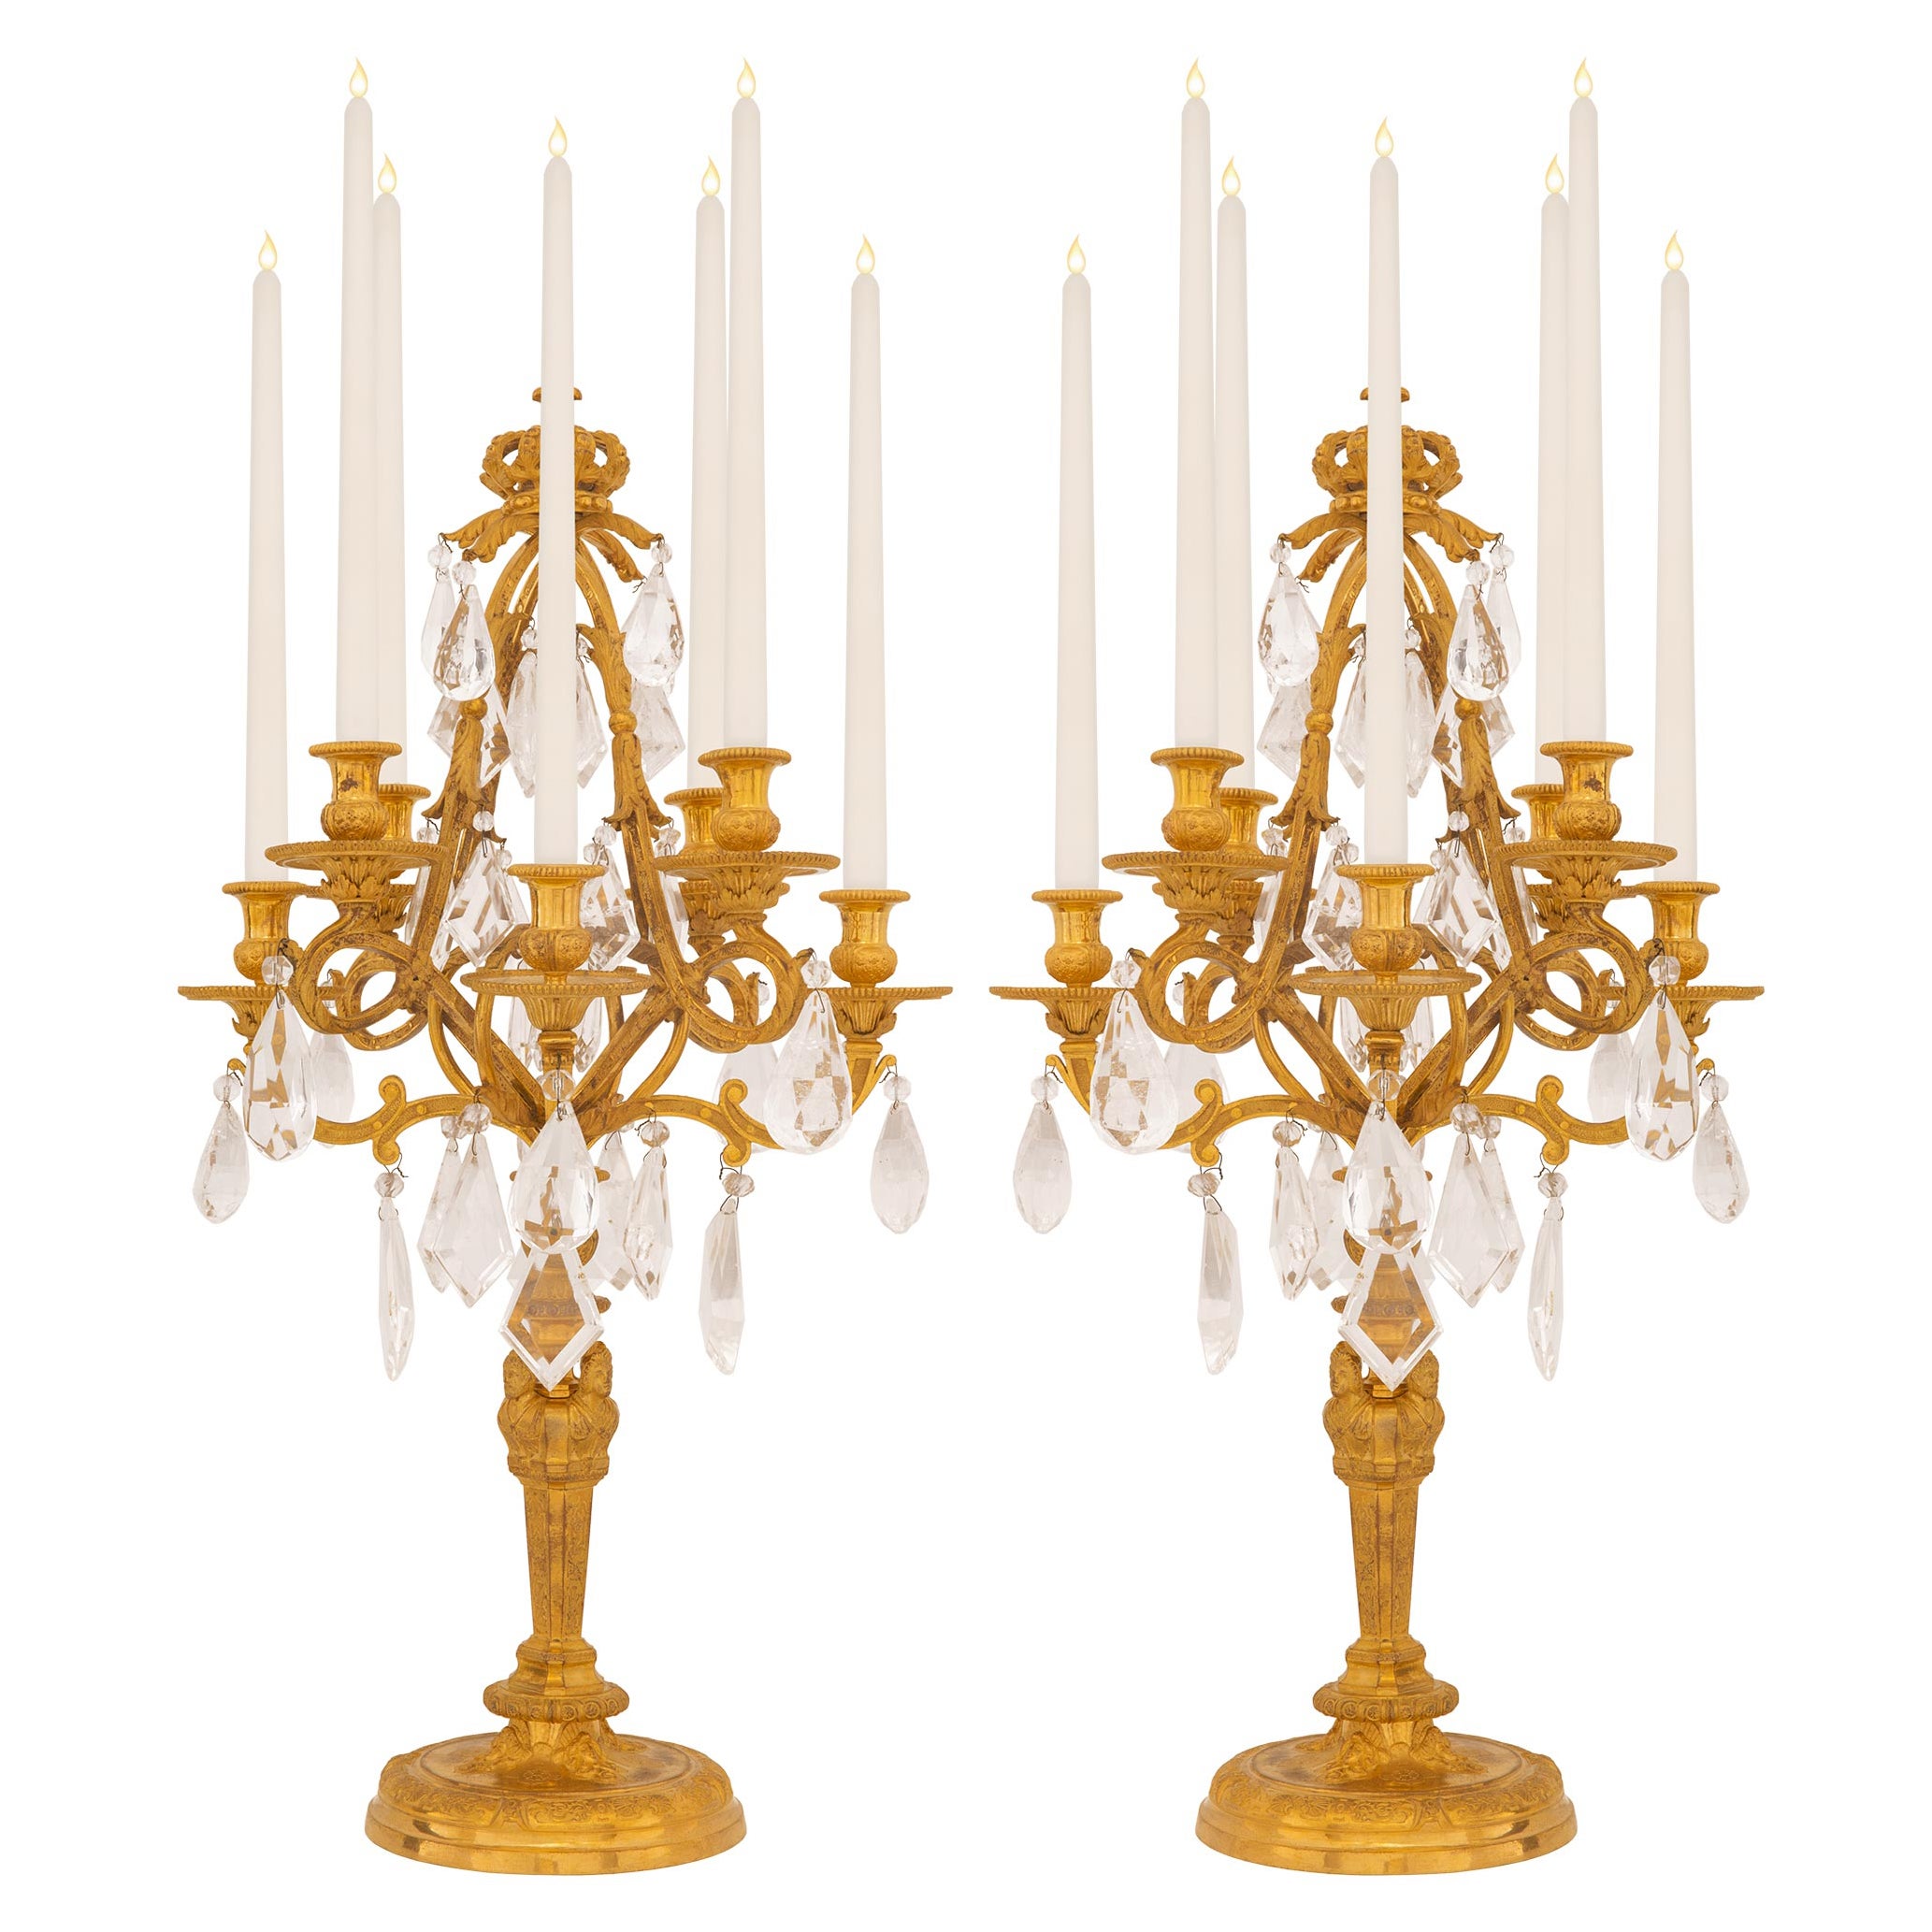 Pair Of French 17th Century Louis XIV Period Ormolu And Rock Crystal Candelabras For Sale